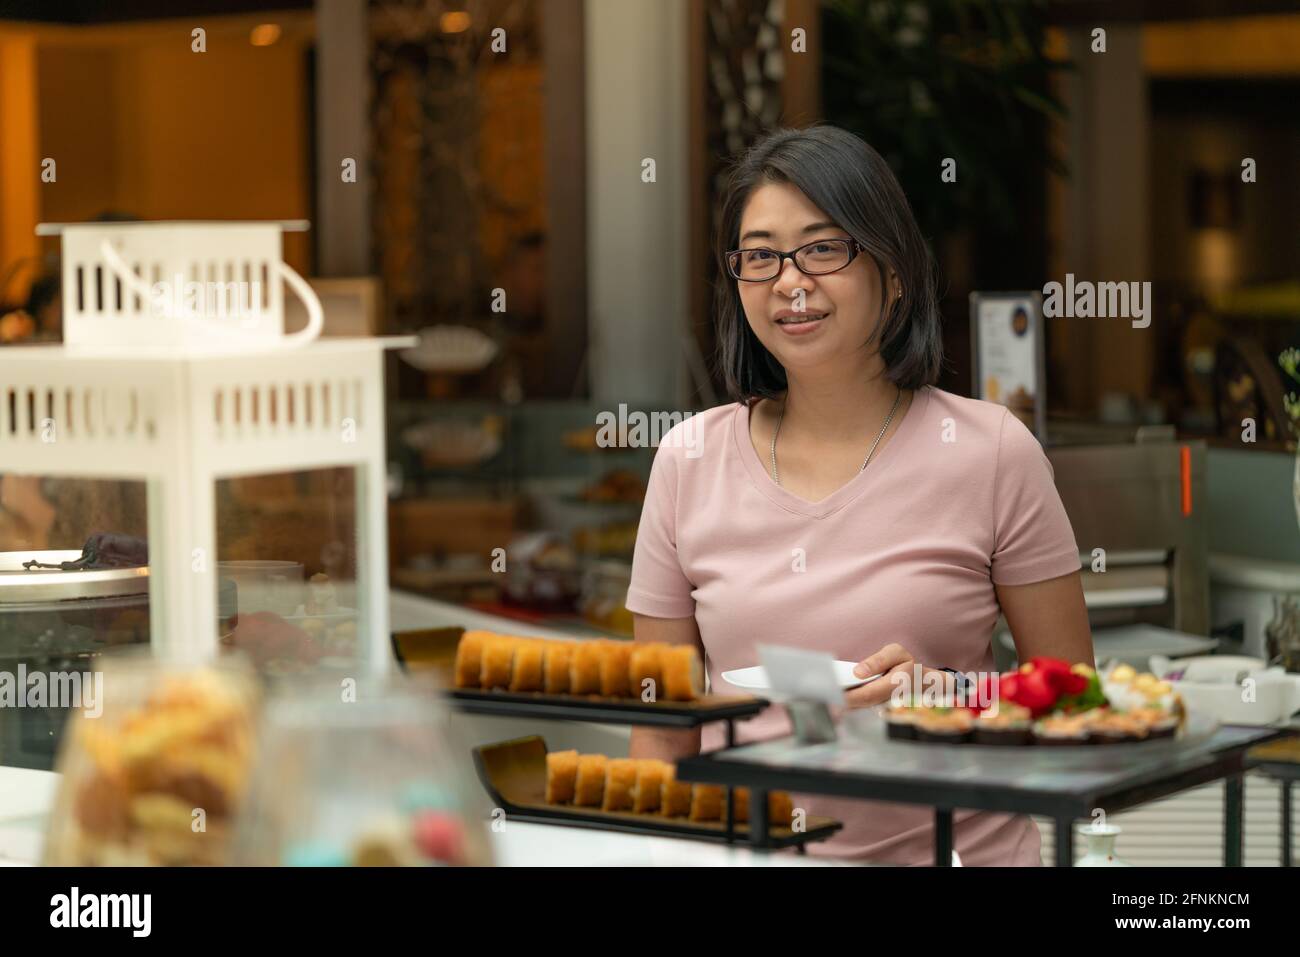 Portrait Asian woman selecting food at food bar, buffet breakfast in a restaurant. Stock Photo